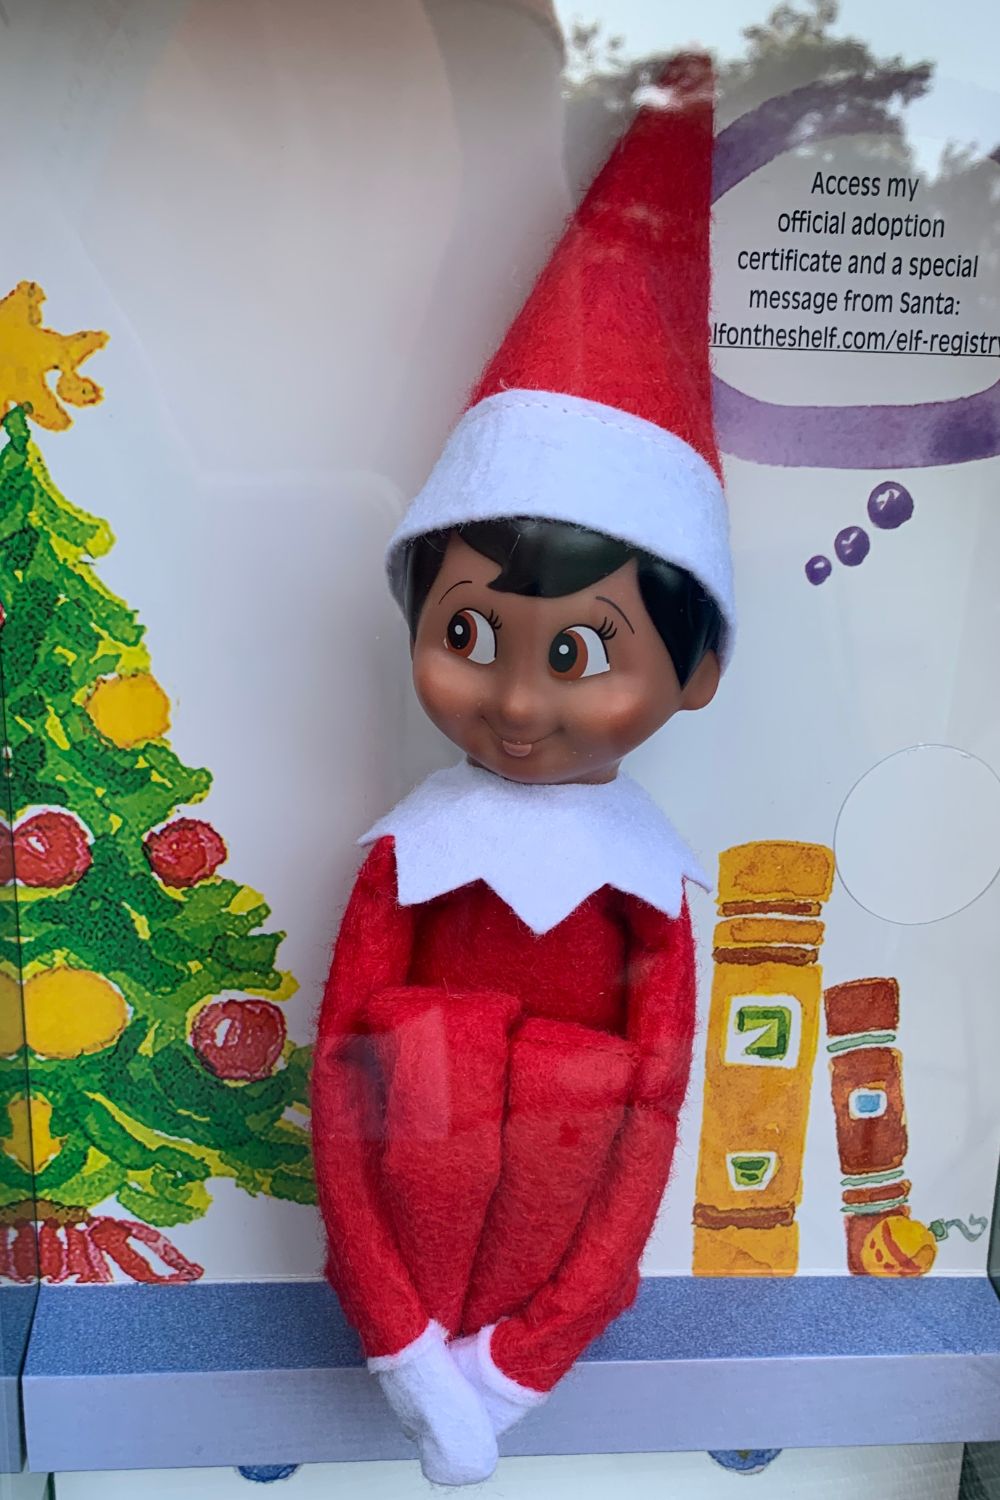 What Is Elf on the Shelf and How Does It Work?